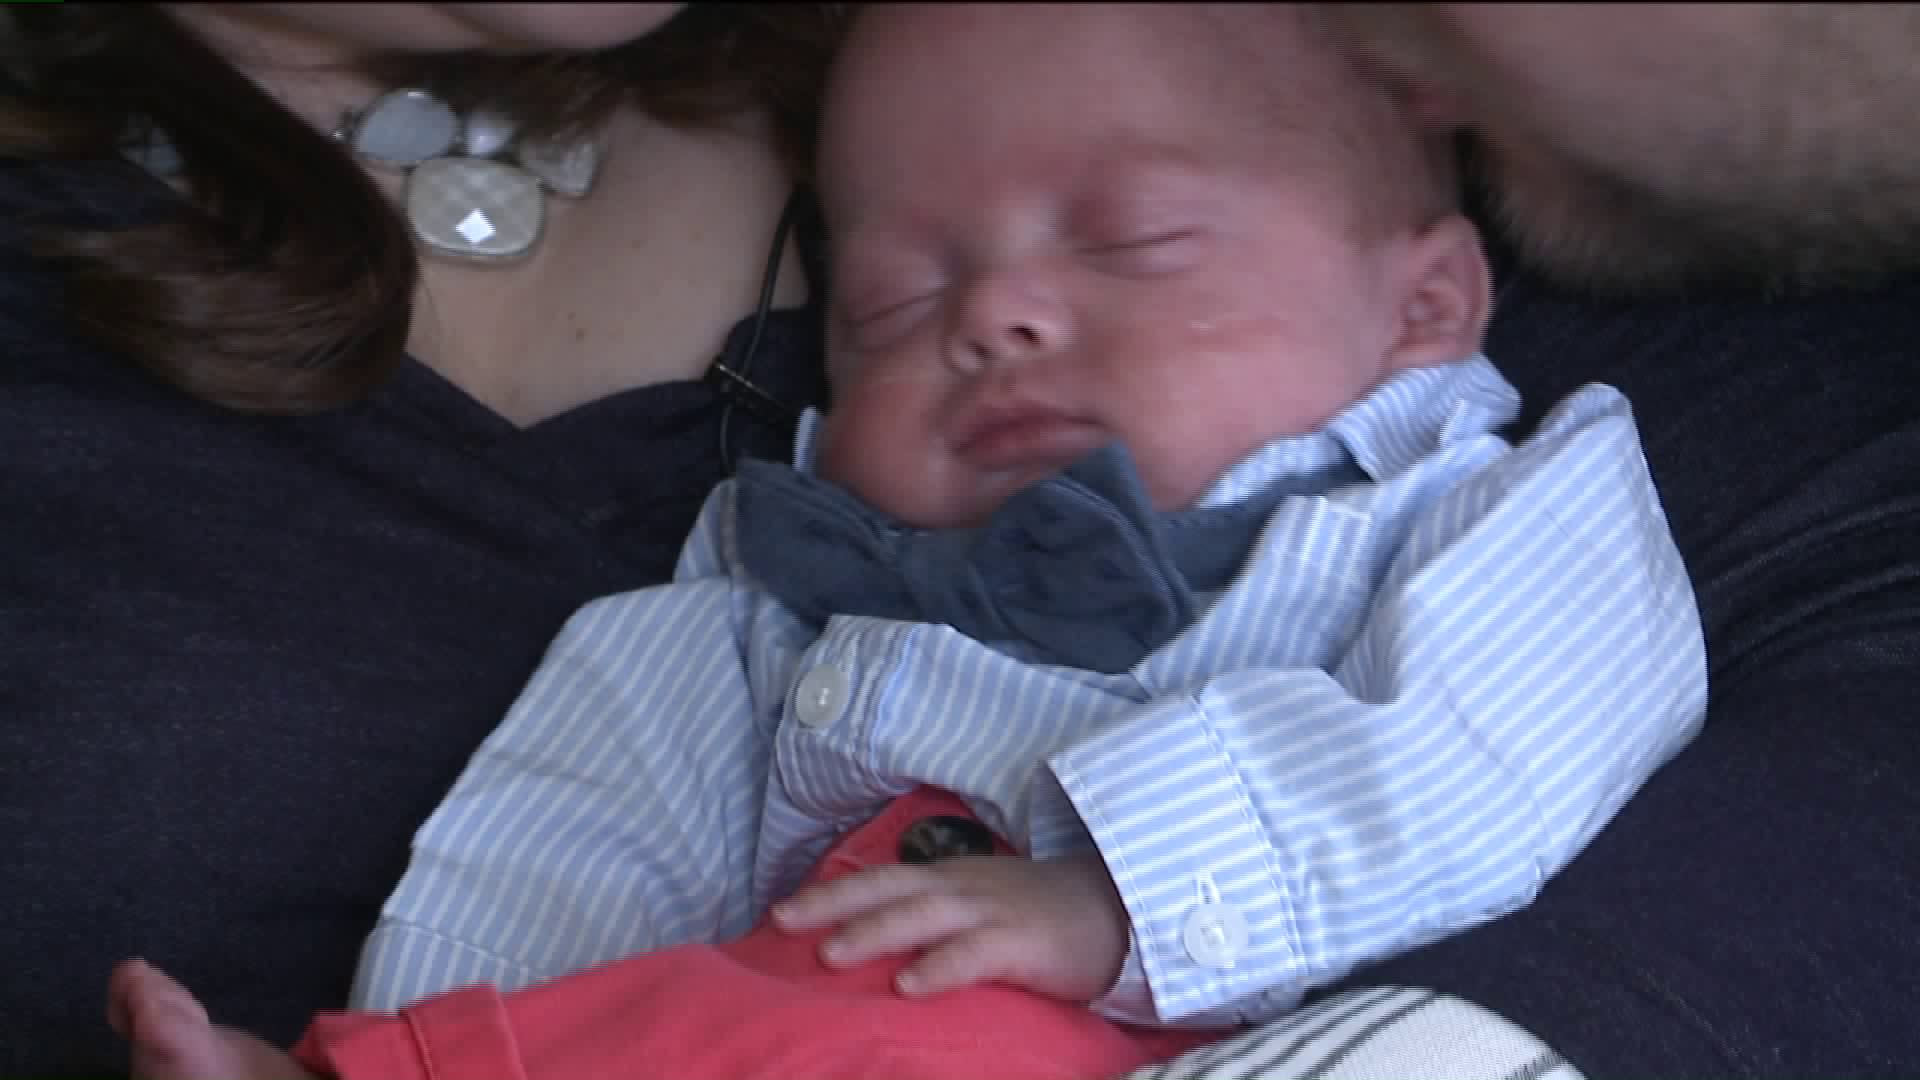 Baby Born Weighing 1 Pound Finally Comes Home from Hospital [Video]